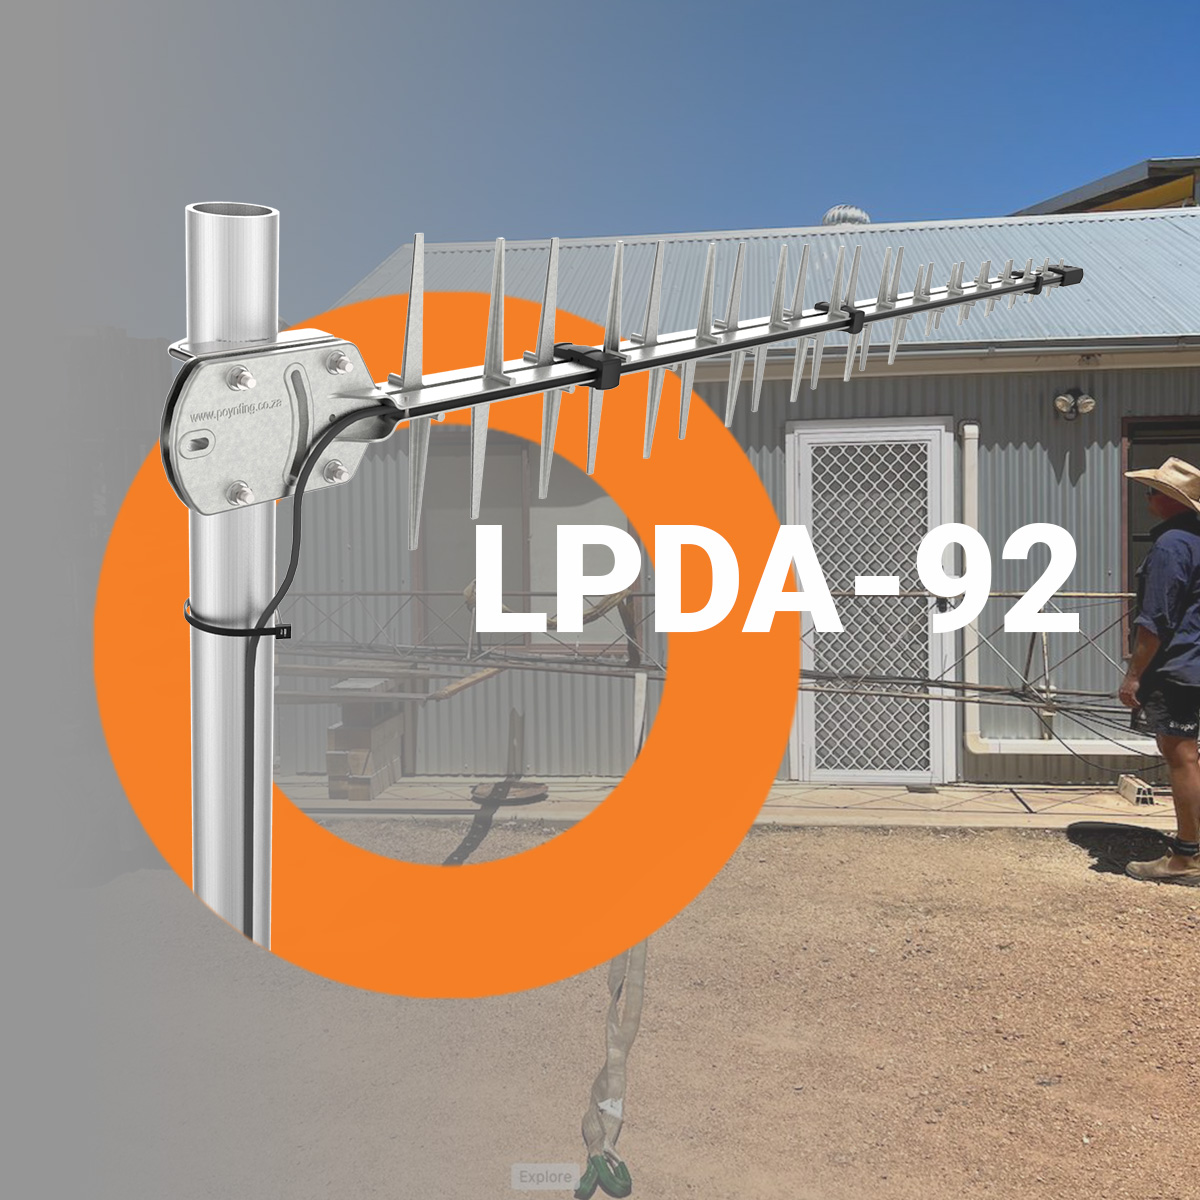 Stable-4G-Connection-LPDA-92-featured-image